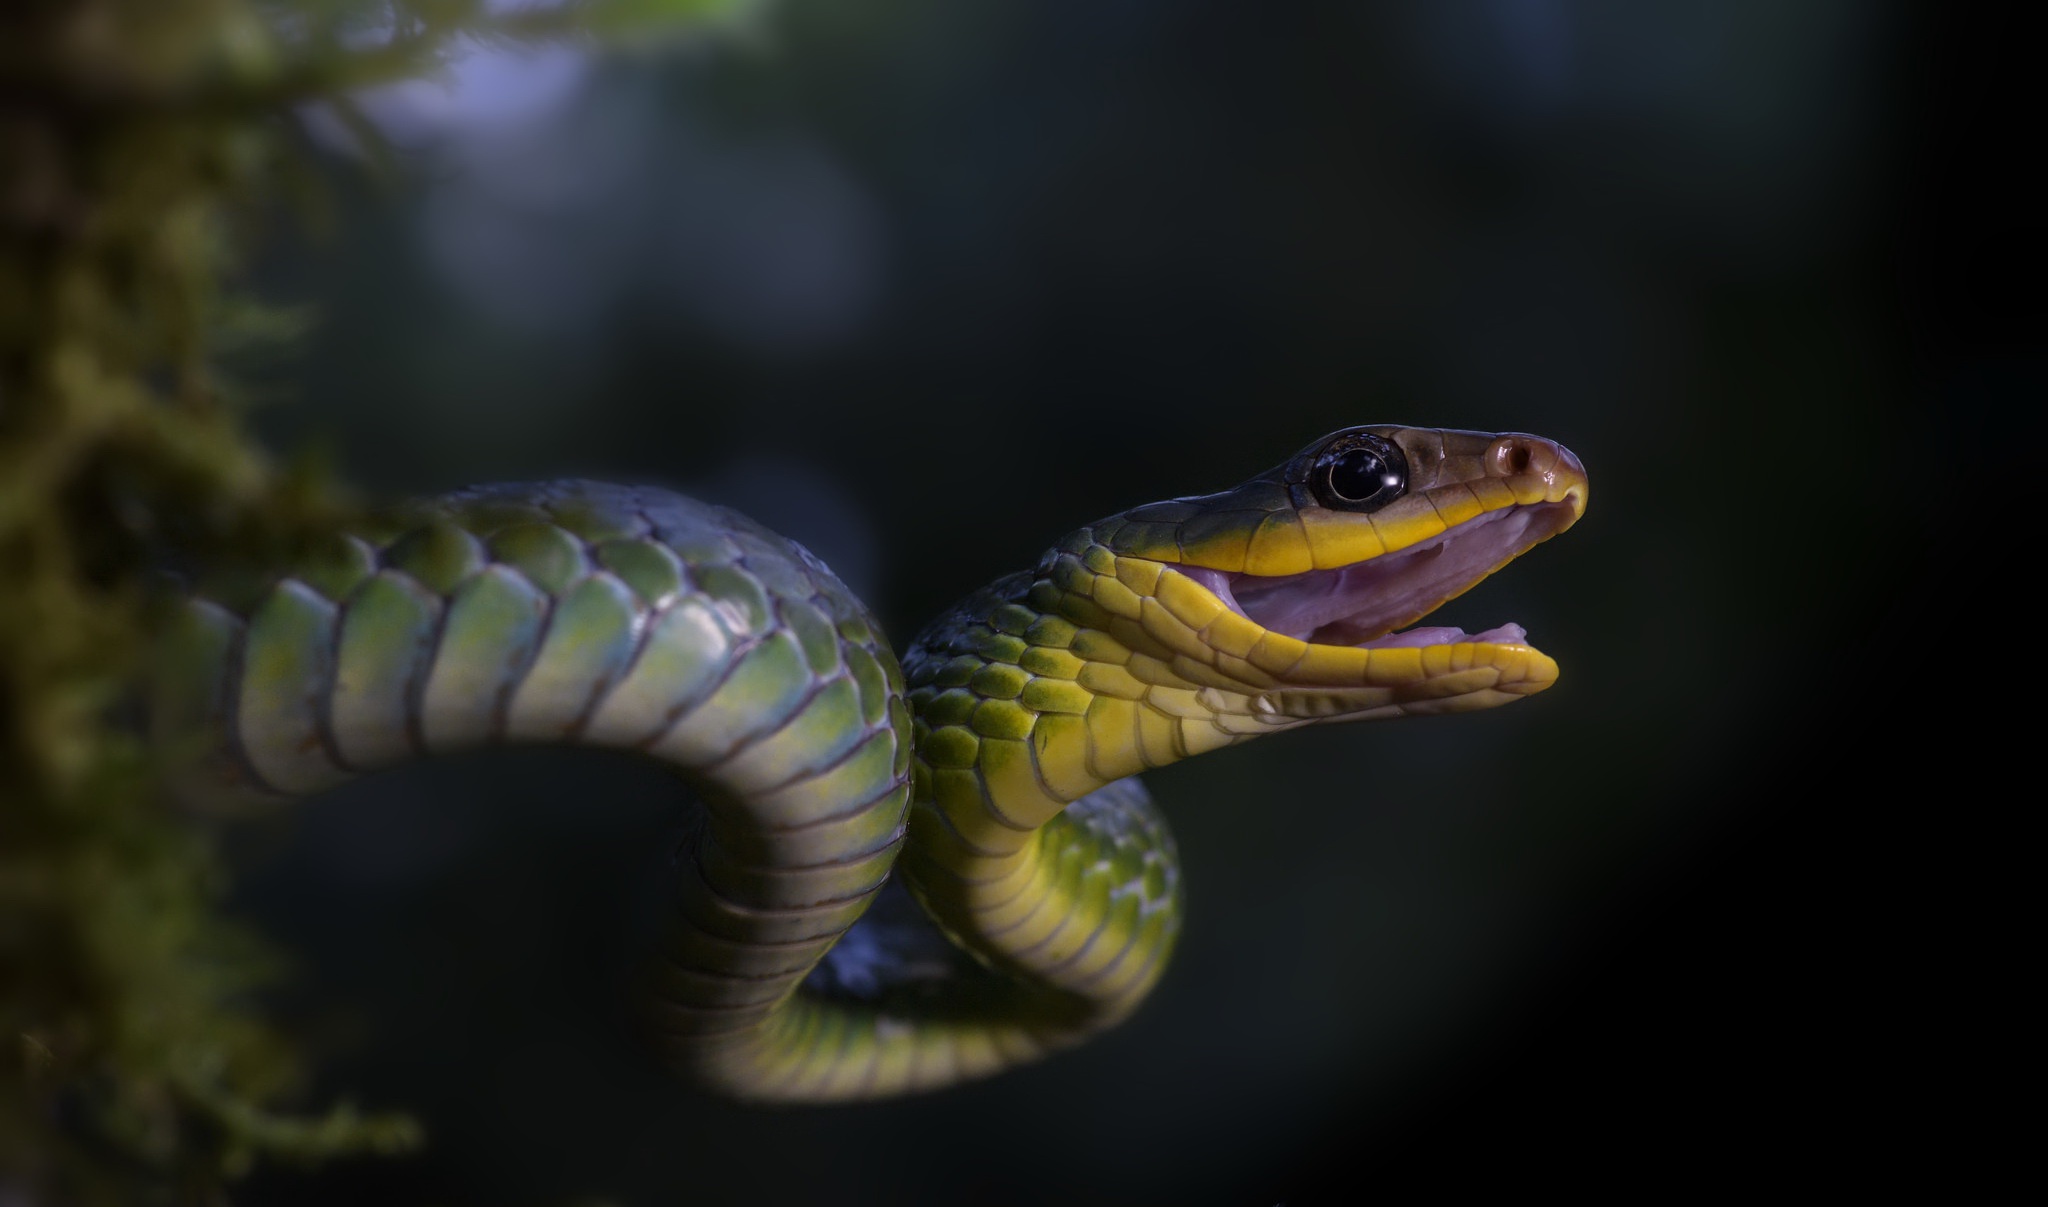 General 2048x1207 snake reptiles animals